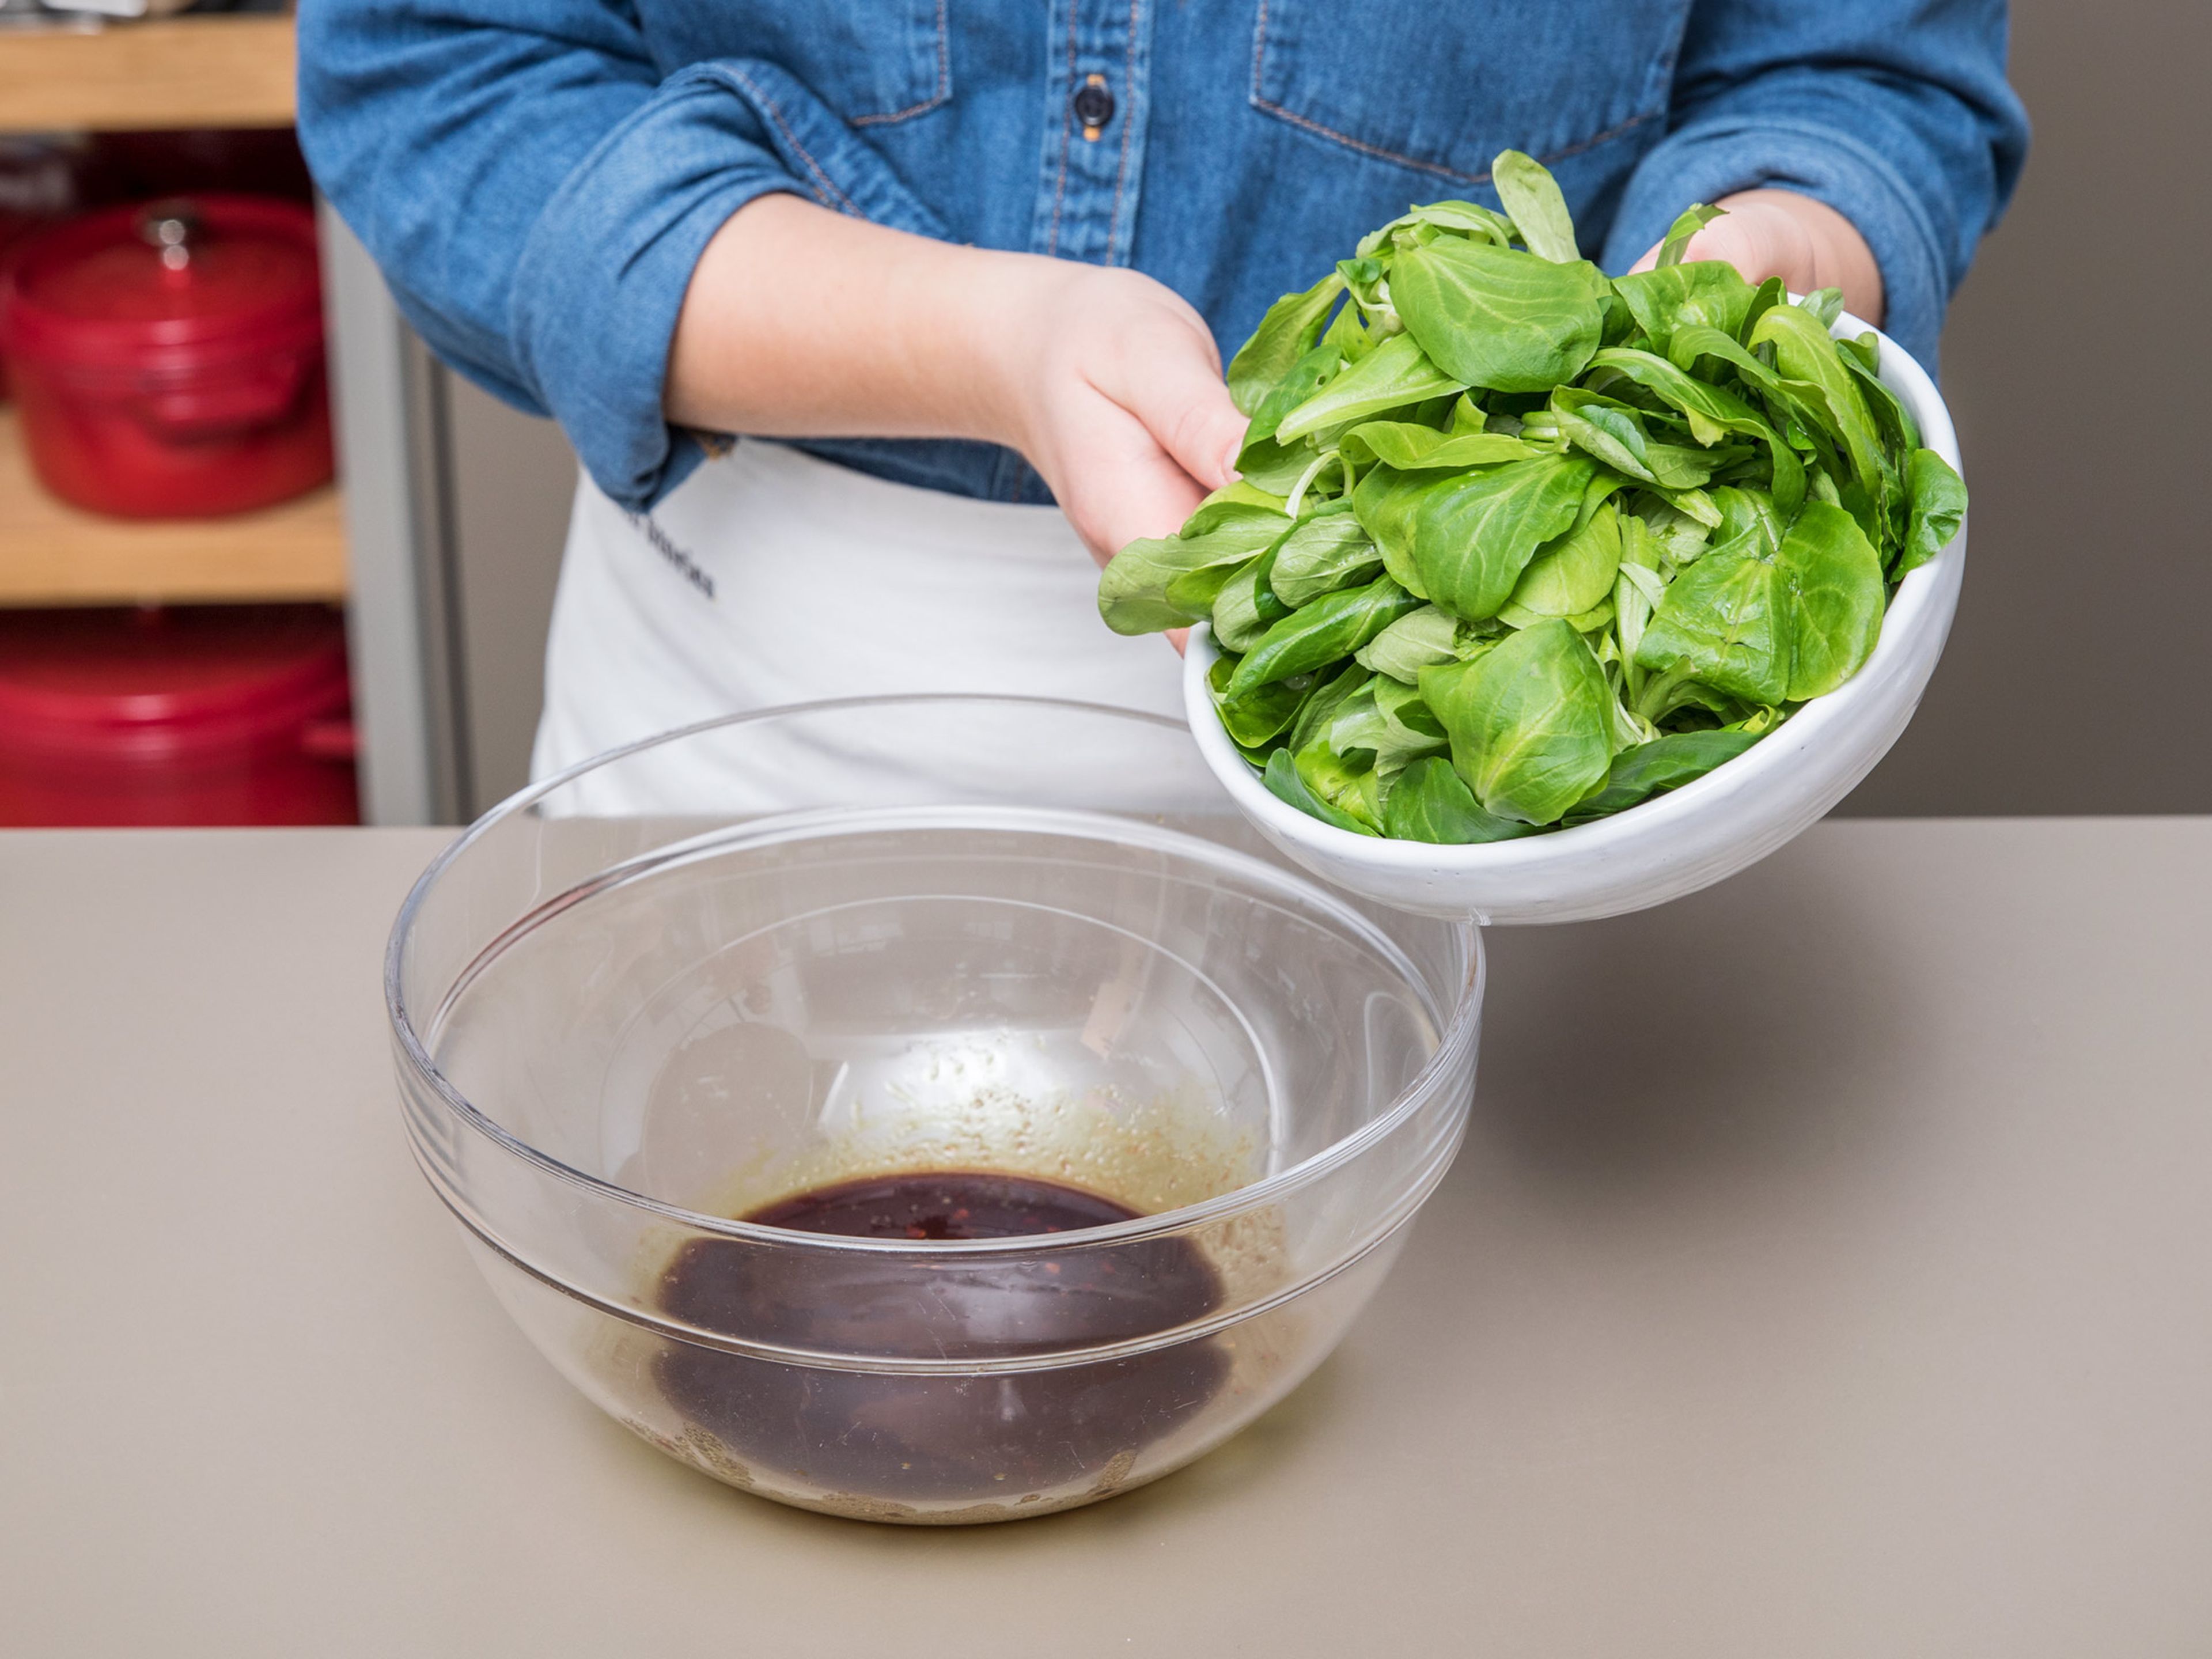 In the meantime, to make the salad, add olive oil, mustard, pumpkin seed oil, balsamic vinegar, sugar, salt, and pepper to a large bowl and mix. Add lamb’s lettuce and toss well to coat with the dressing. Serve with the warm baked Brie and enjoy!